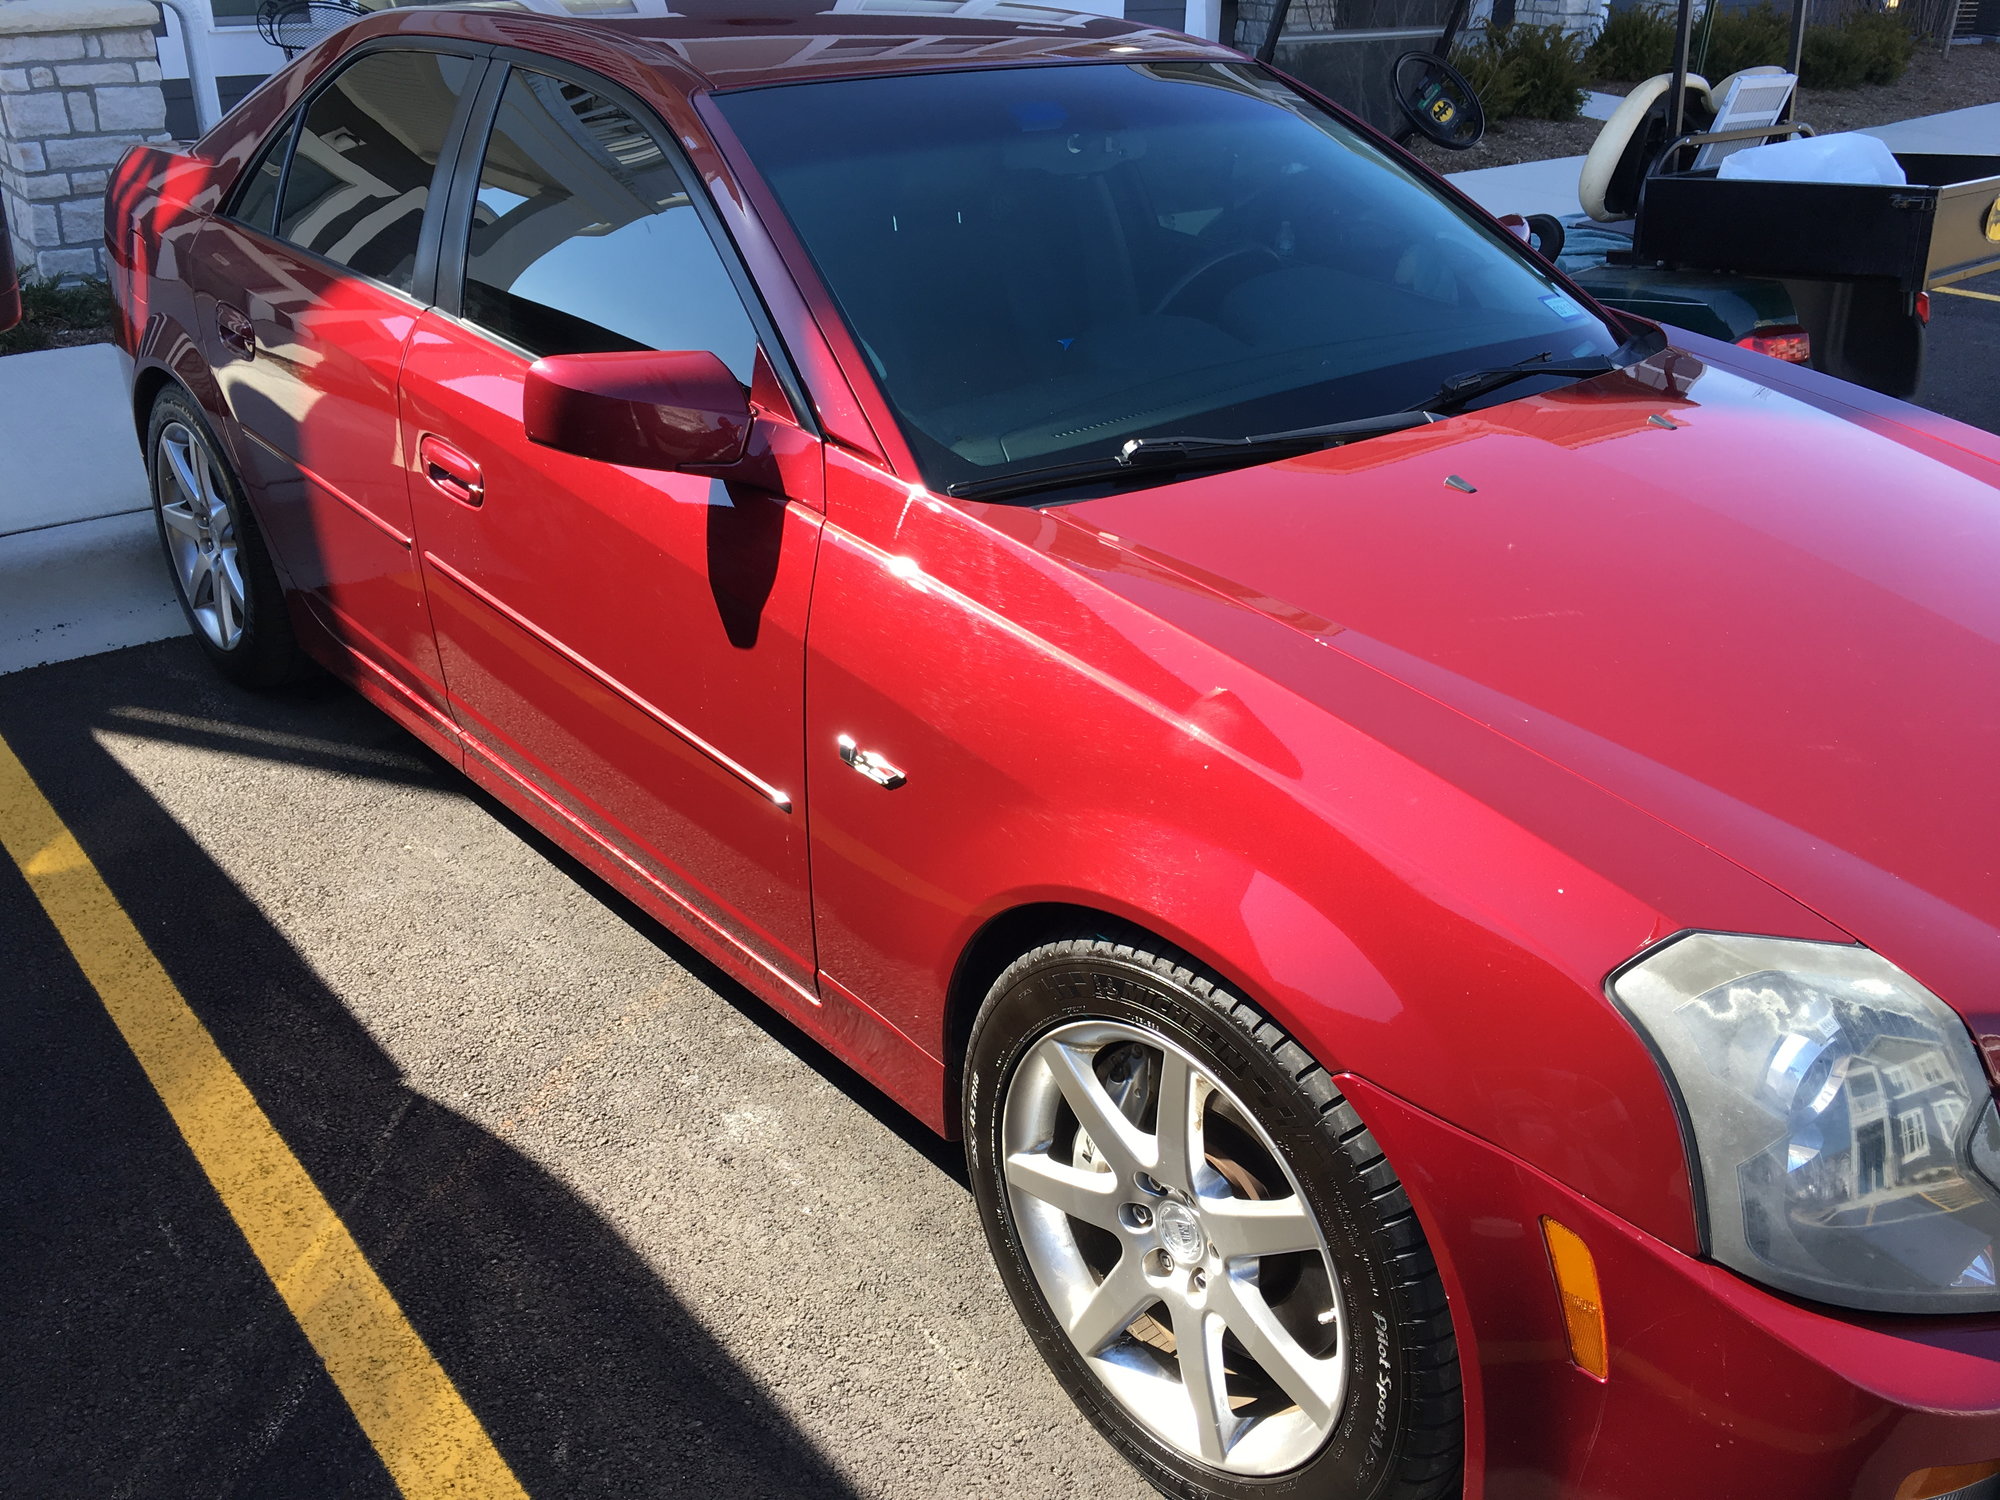 WTT (Want To Trade) WTT: 2005 Cadillac CTS-V for C5 FRC ...